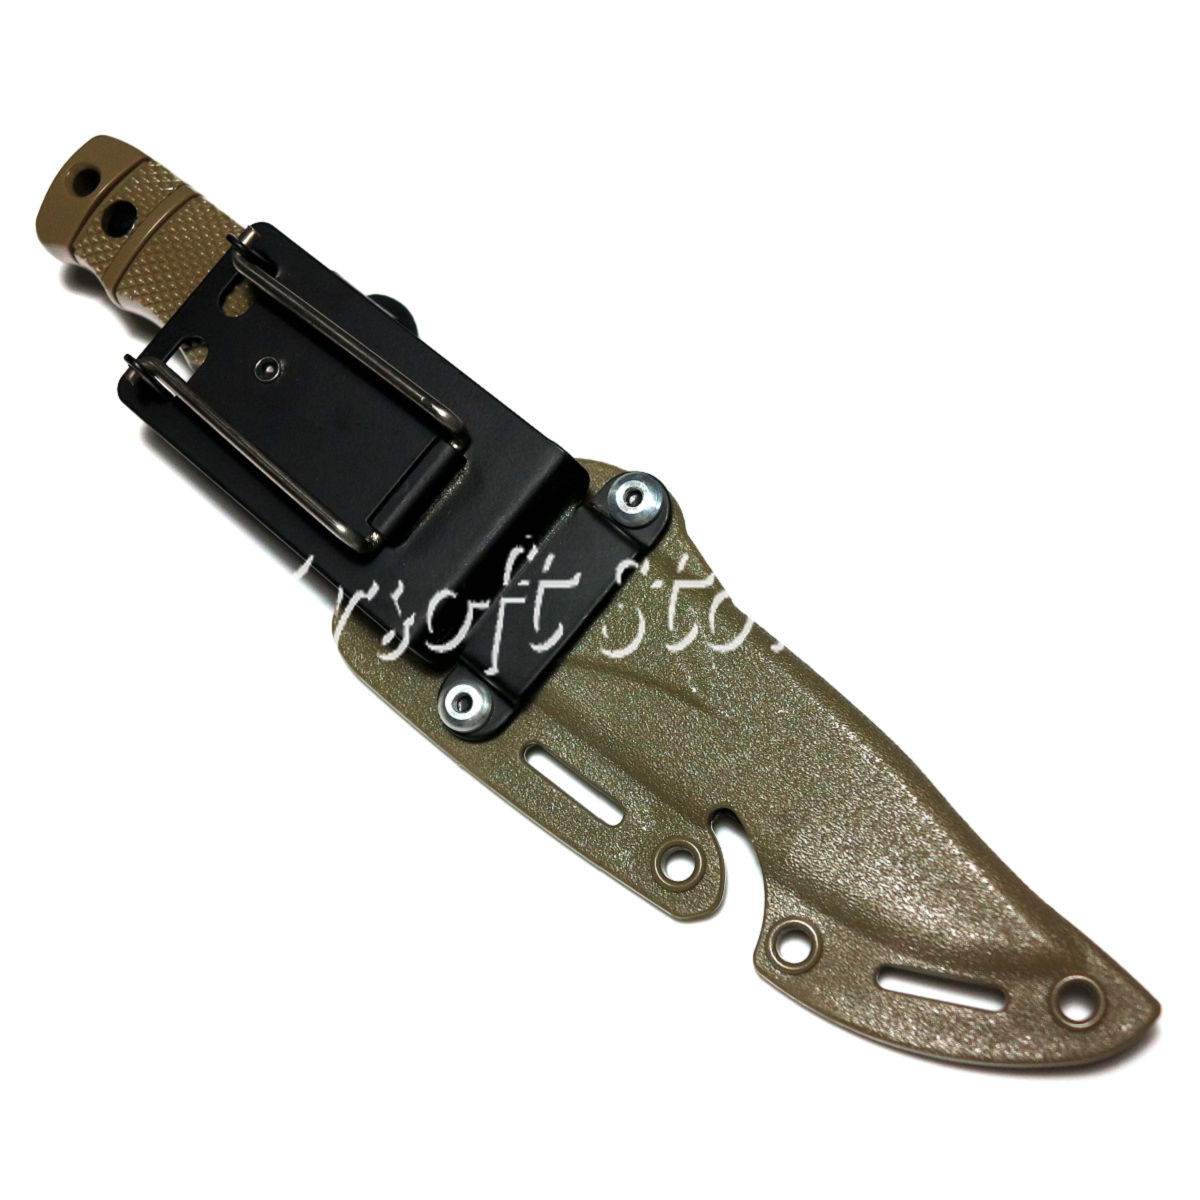 Airsoft Wargame Combat Gear CYMA Dummy Plastic M37 Seal Pup Knife with Sheath Tan (HY-016)